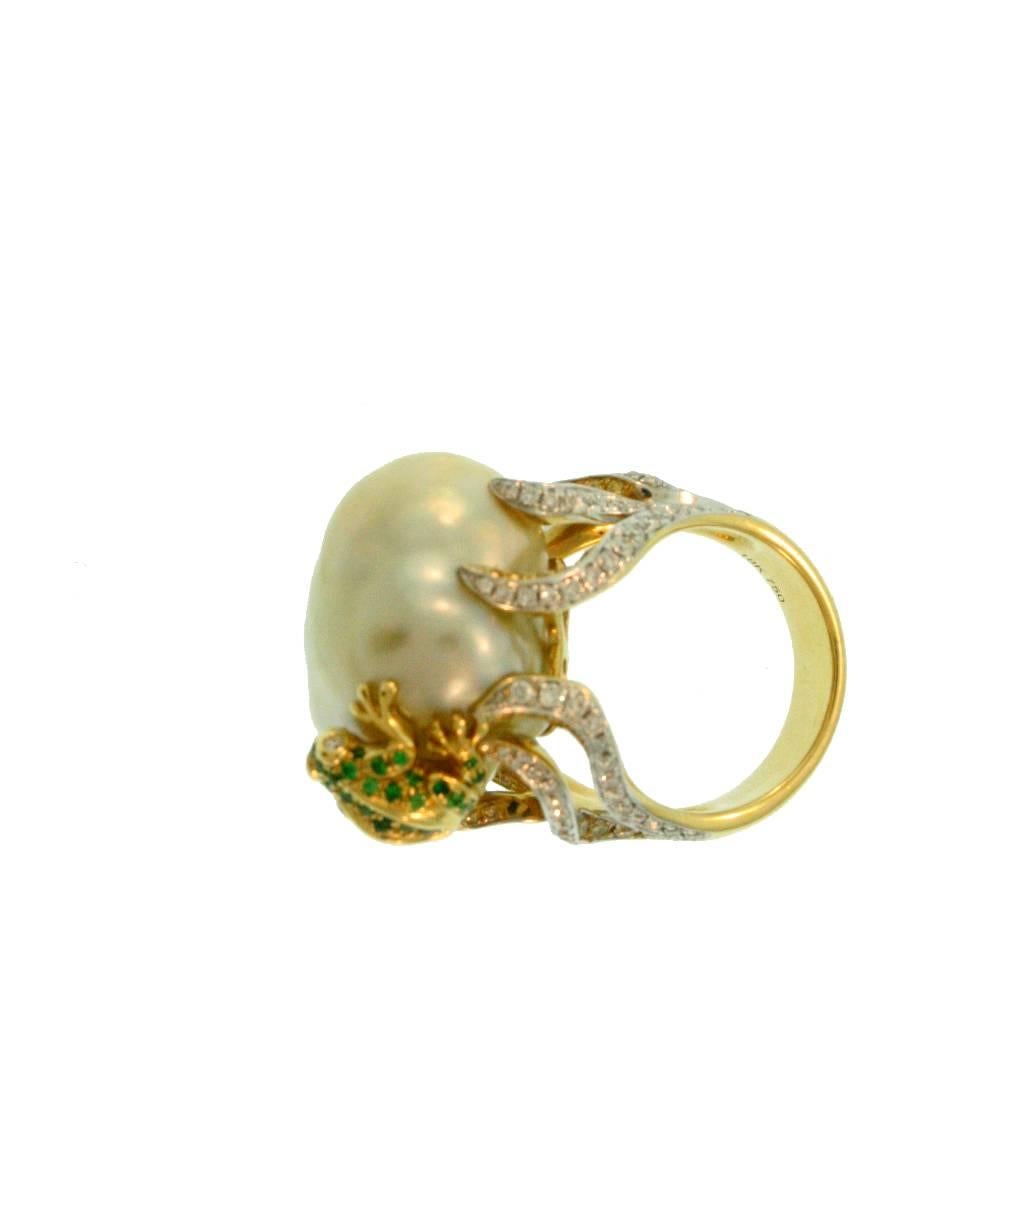 This fun one of a kind cocktail ring adds a bit of flair to any outfit! The frog, made of 18k yellow gold and Green Tsavorite, is climbing on a 17x18mm Natural Color Golden South Sea Cultured Pearl. The ring setting is 18k yellow gold consisting of